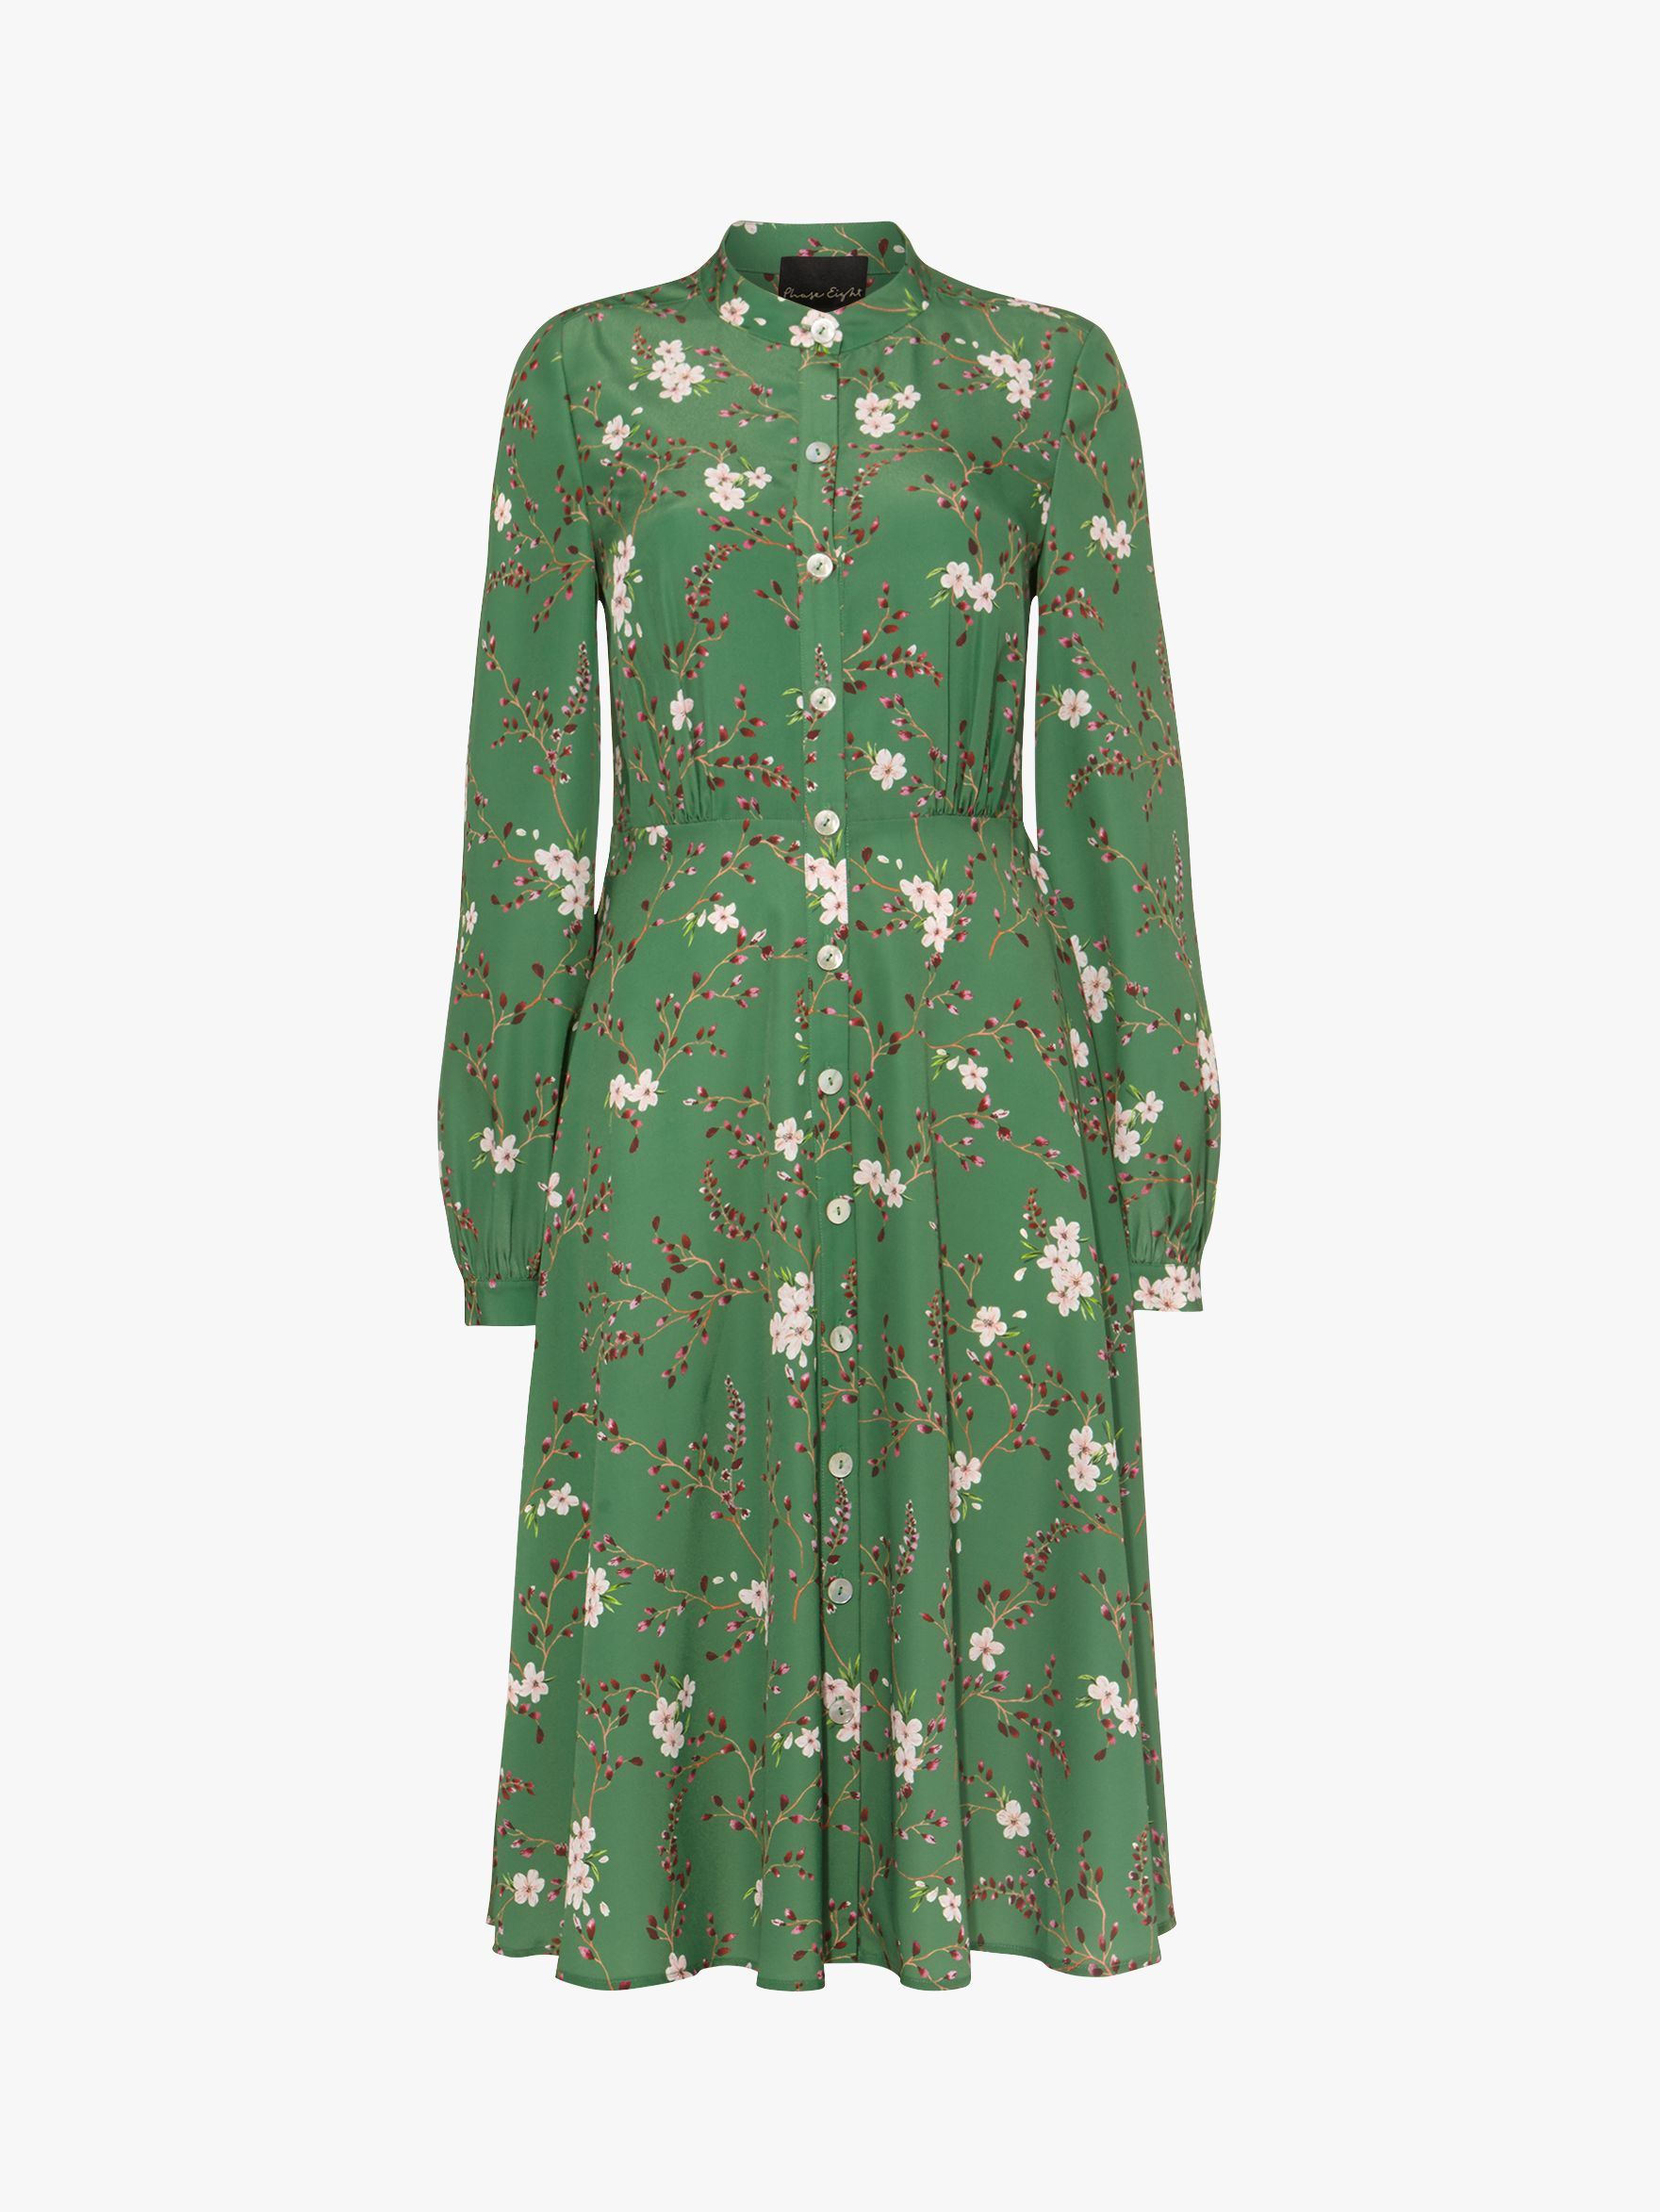 Phase Eight Christina Floral Flared Dress, Jade